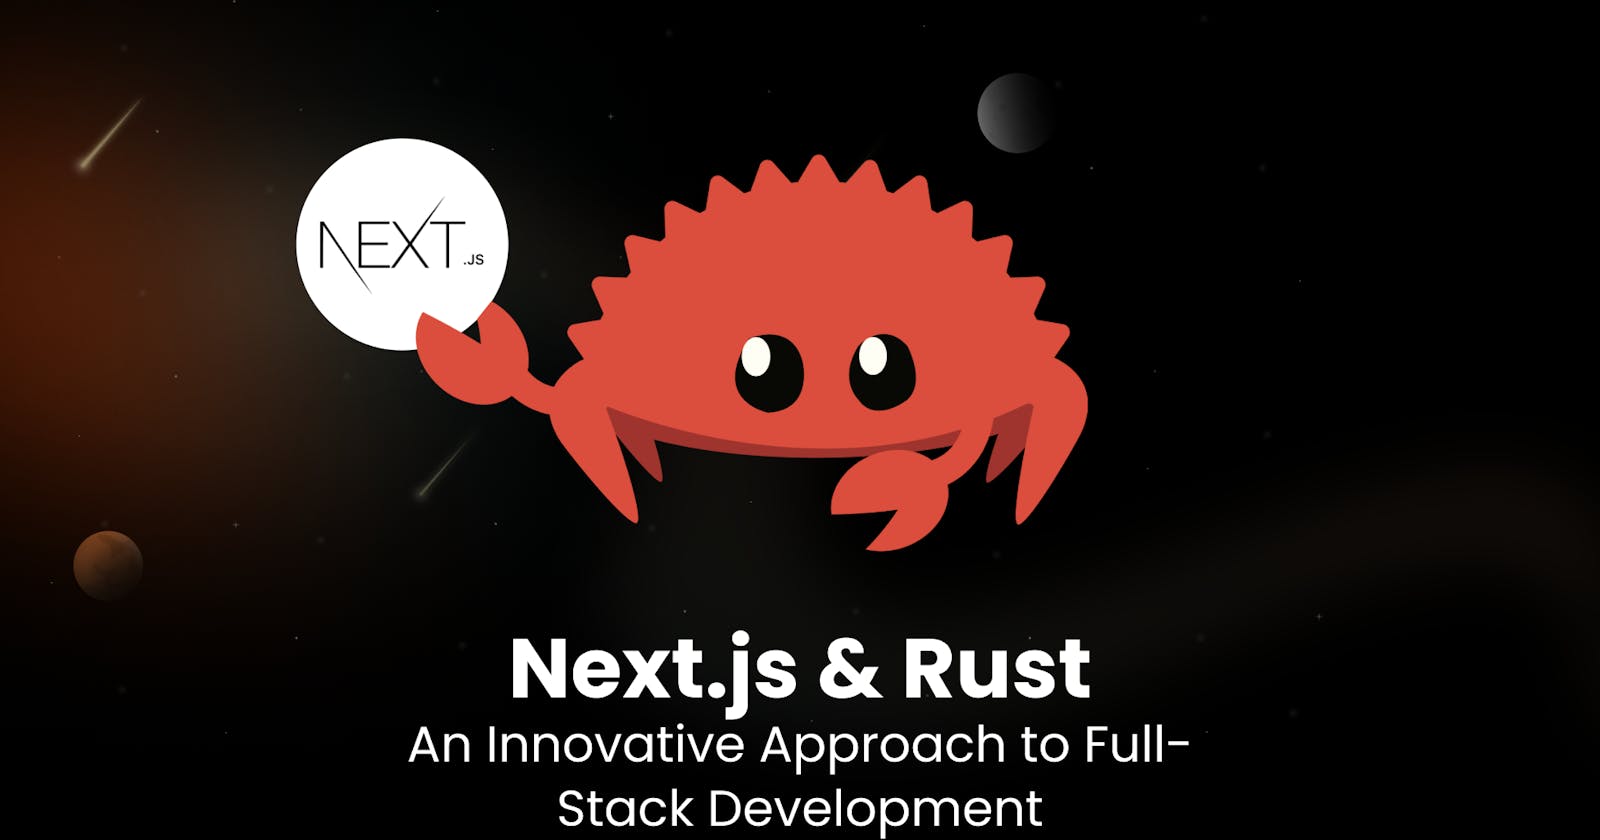 Next.js and Rust: An Innovative Approach to Full-Stack Development